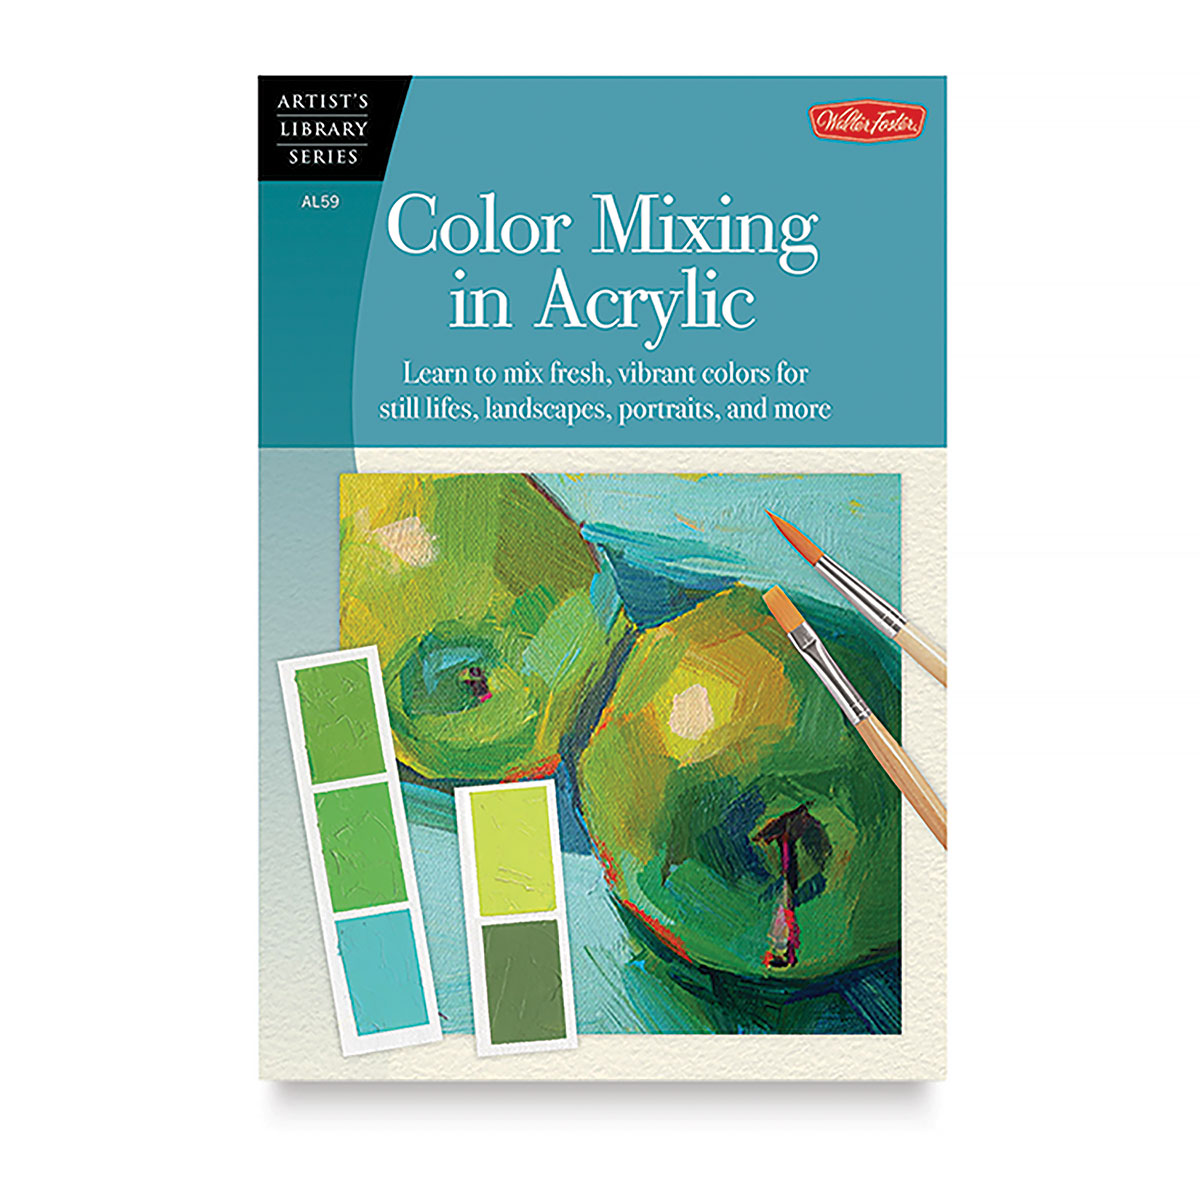 20 Best Acrylics Painting Books of All Time - BookAuthority